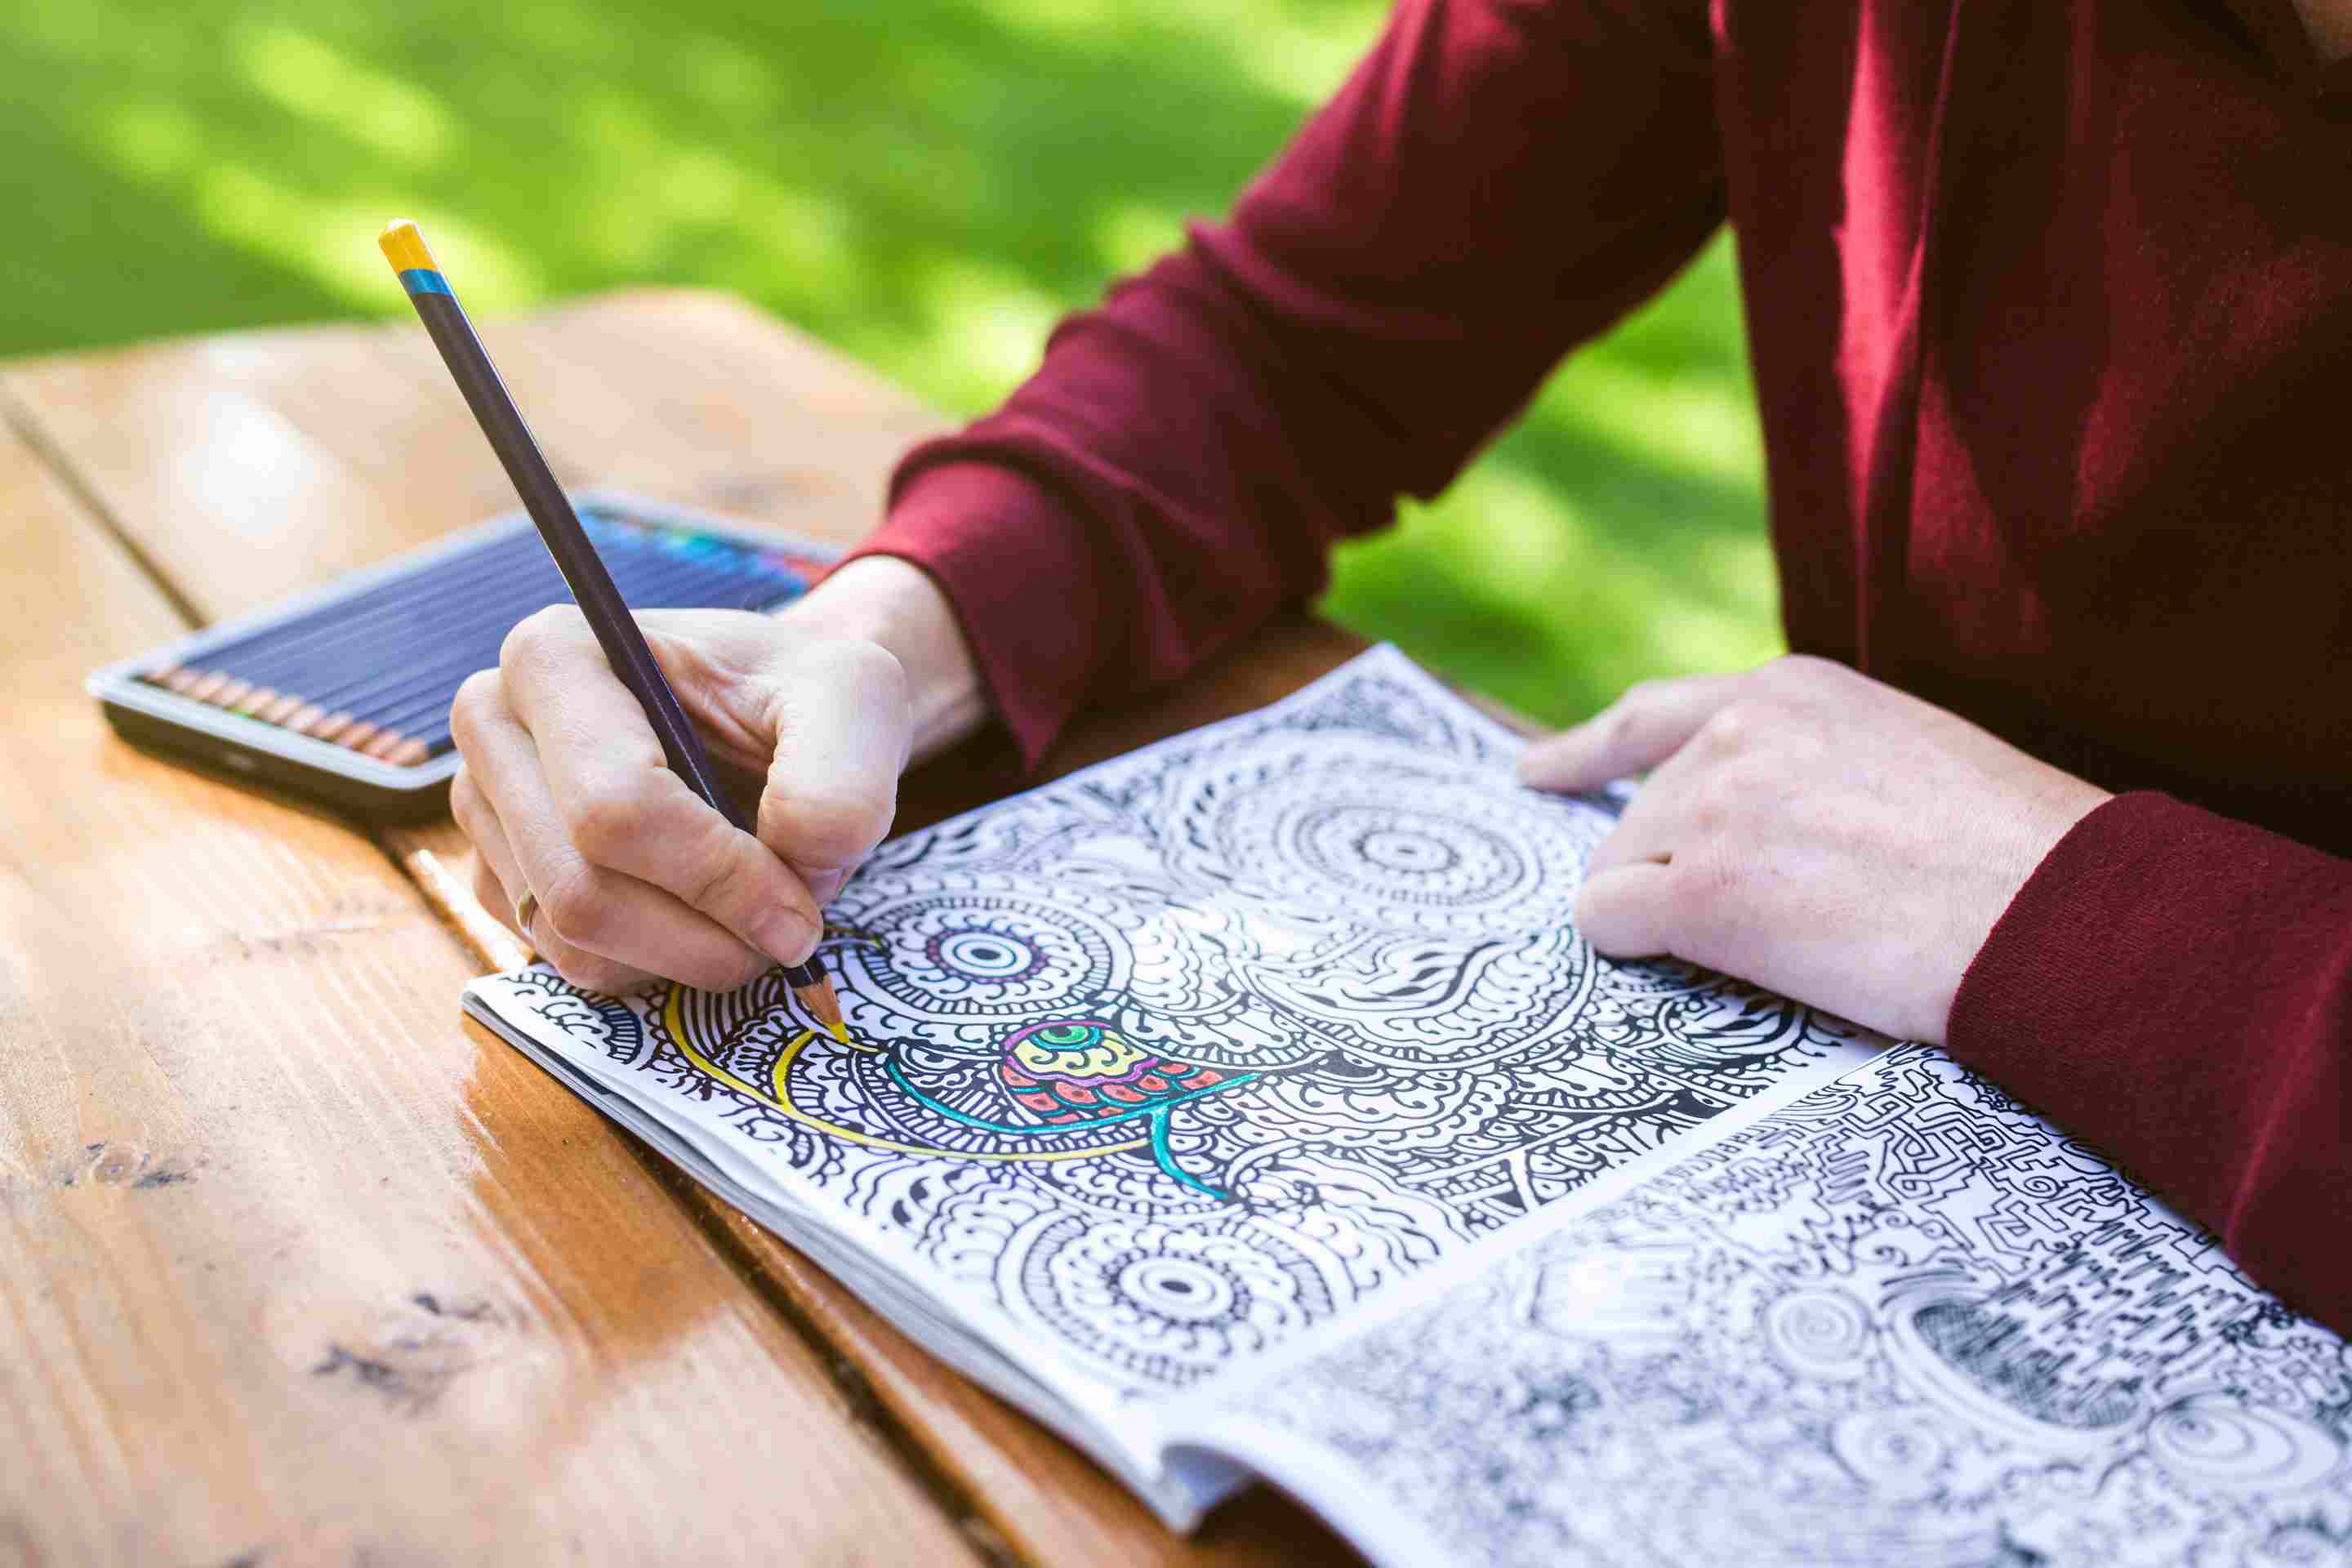 Woman using a coloring pencil to color an intricate coloring book.